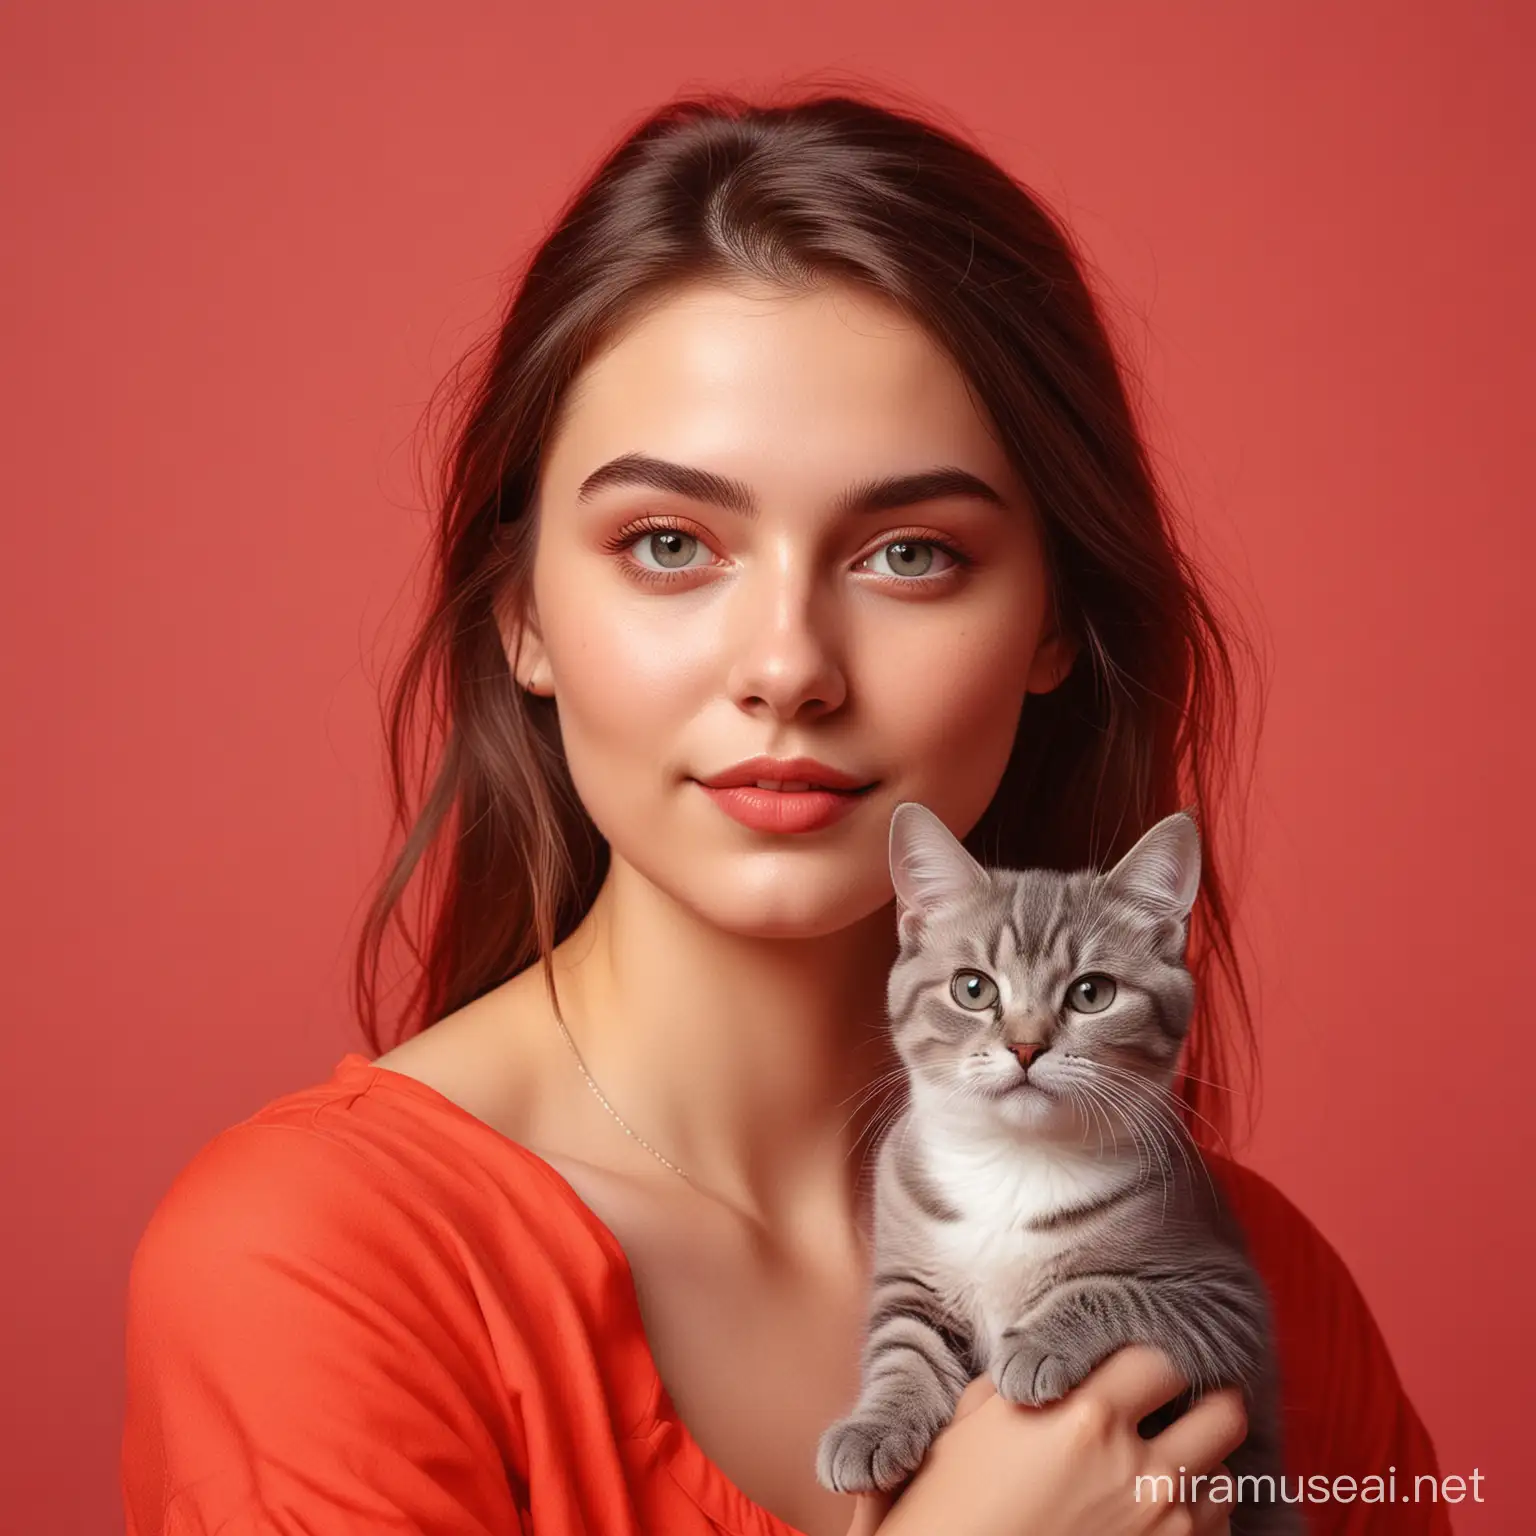 Modern Young Girl with Cat on Bright Crimson Background